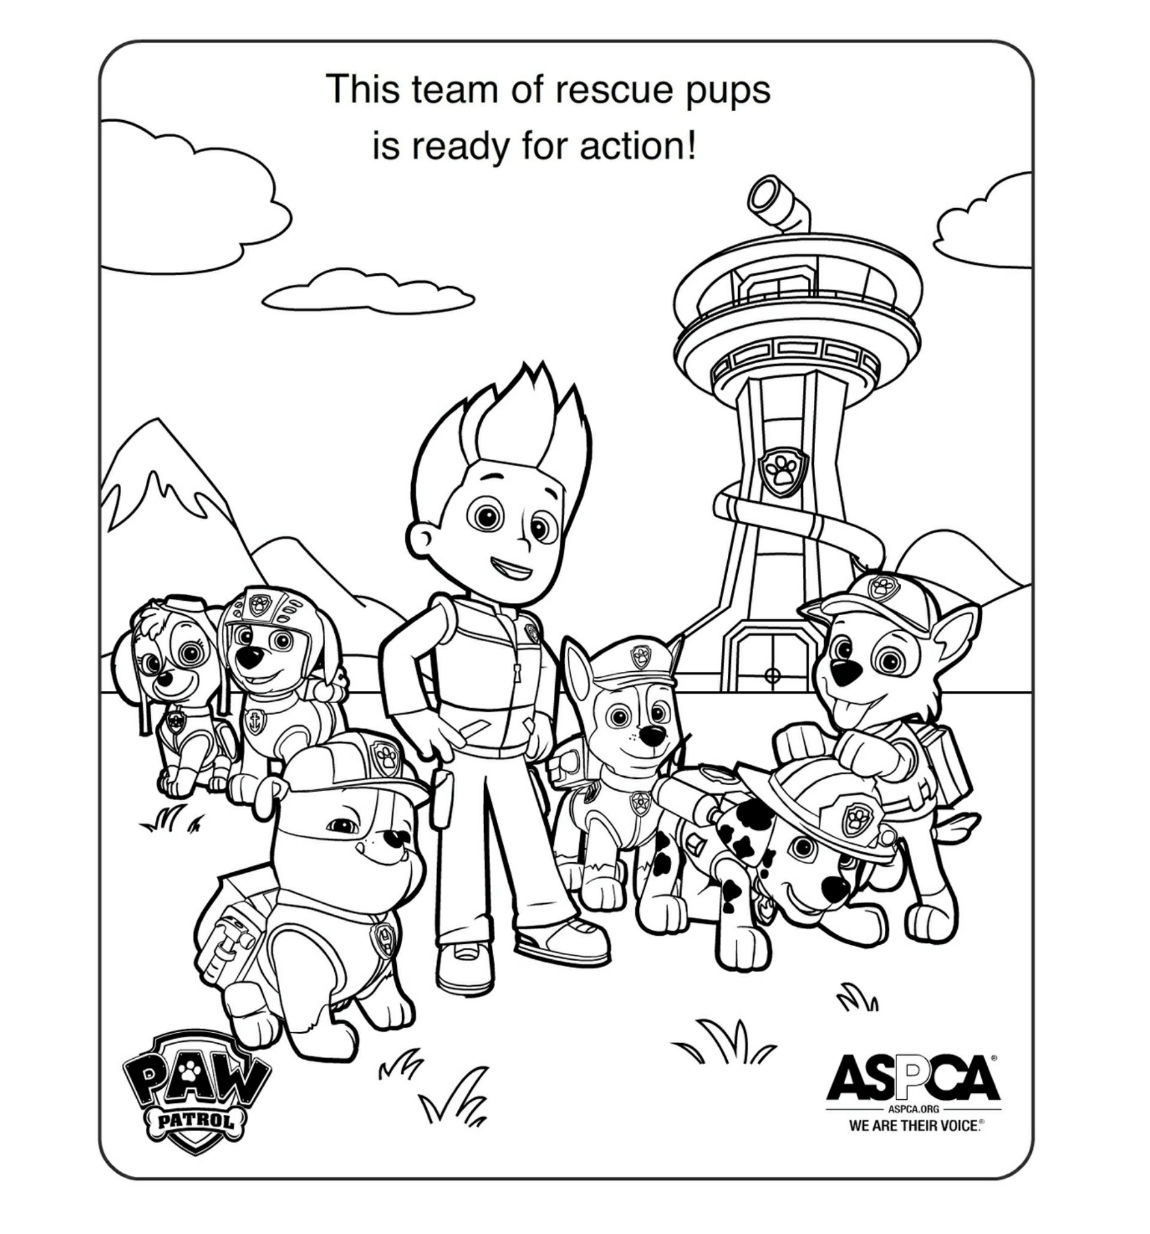 Paw Patrol Coloring Pages   Coloring Home